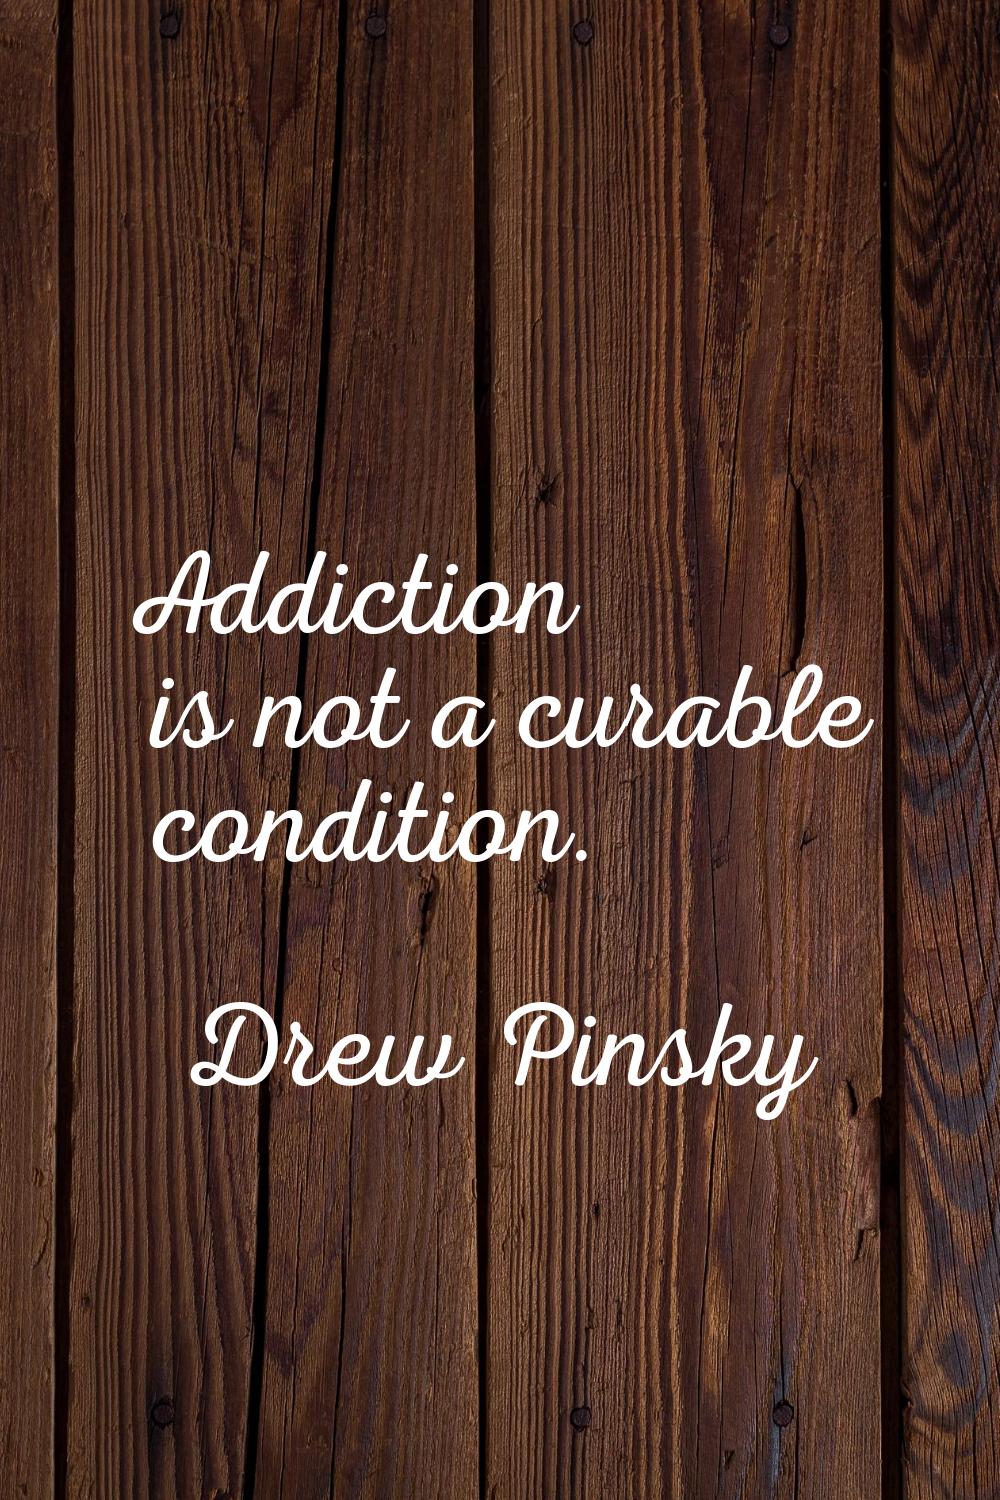 Addiction is not a curable condition.